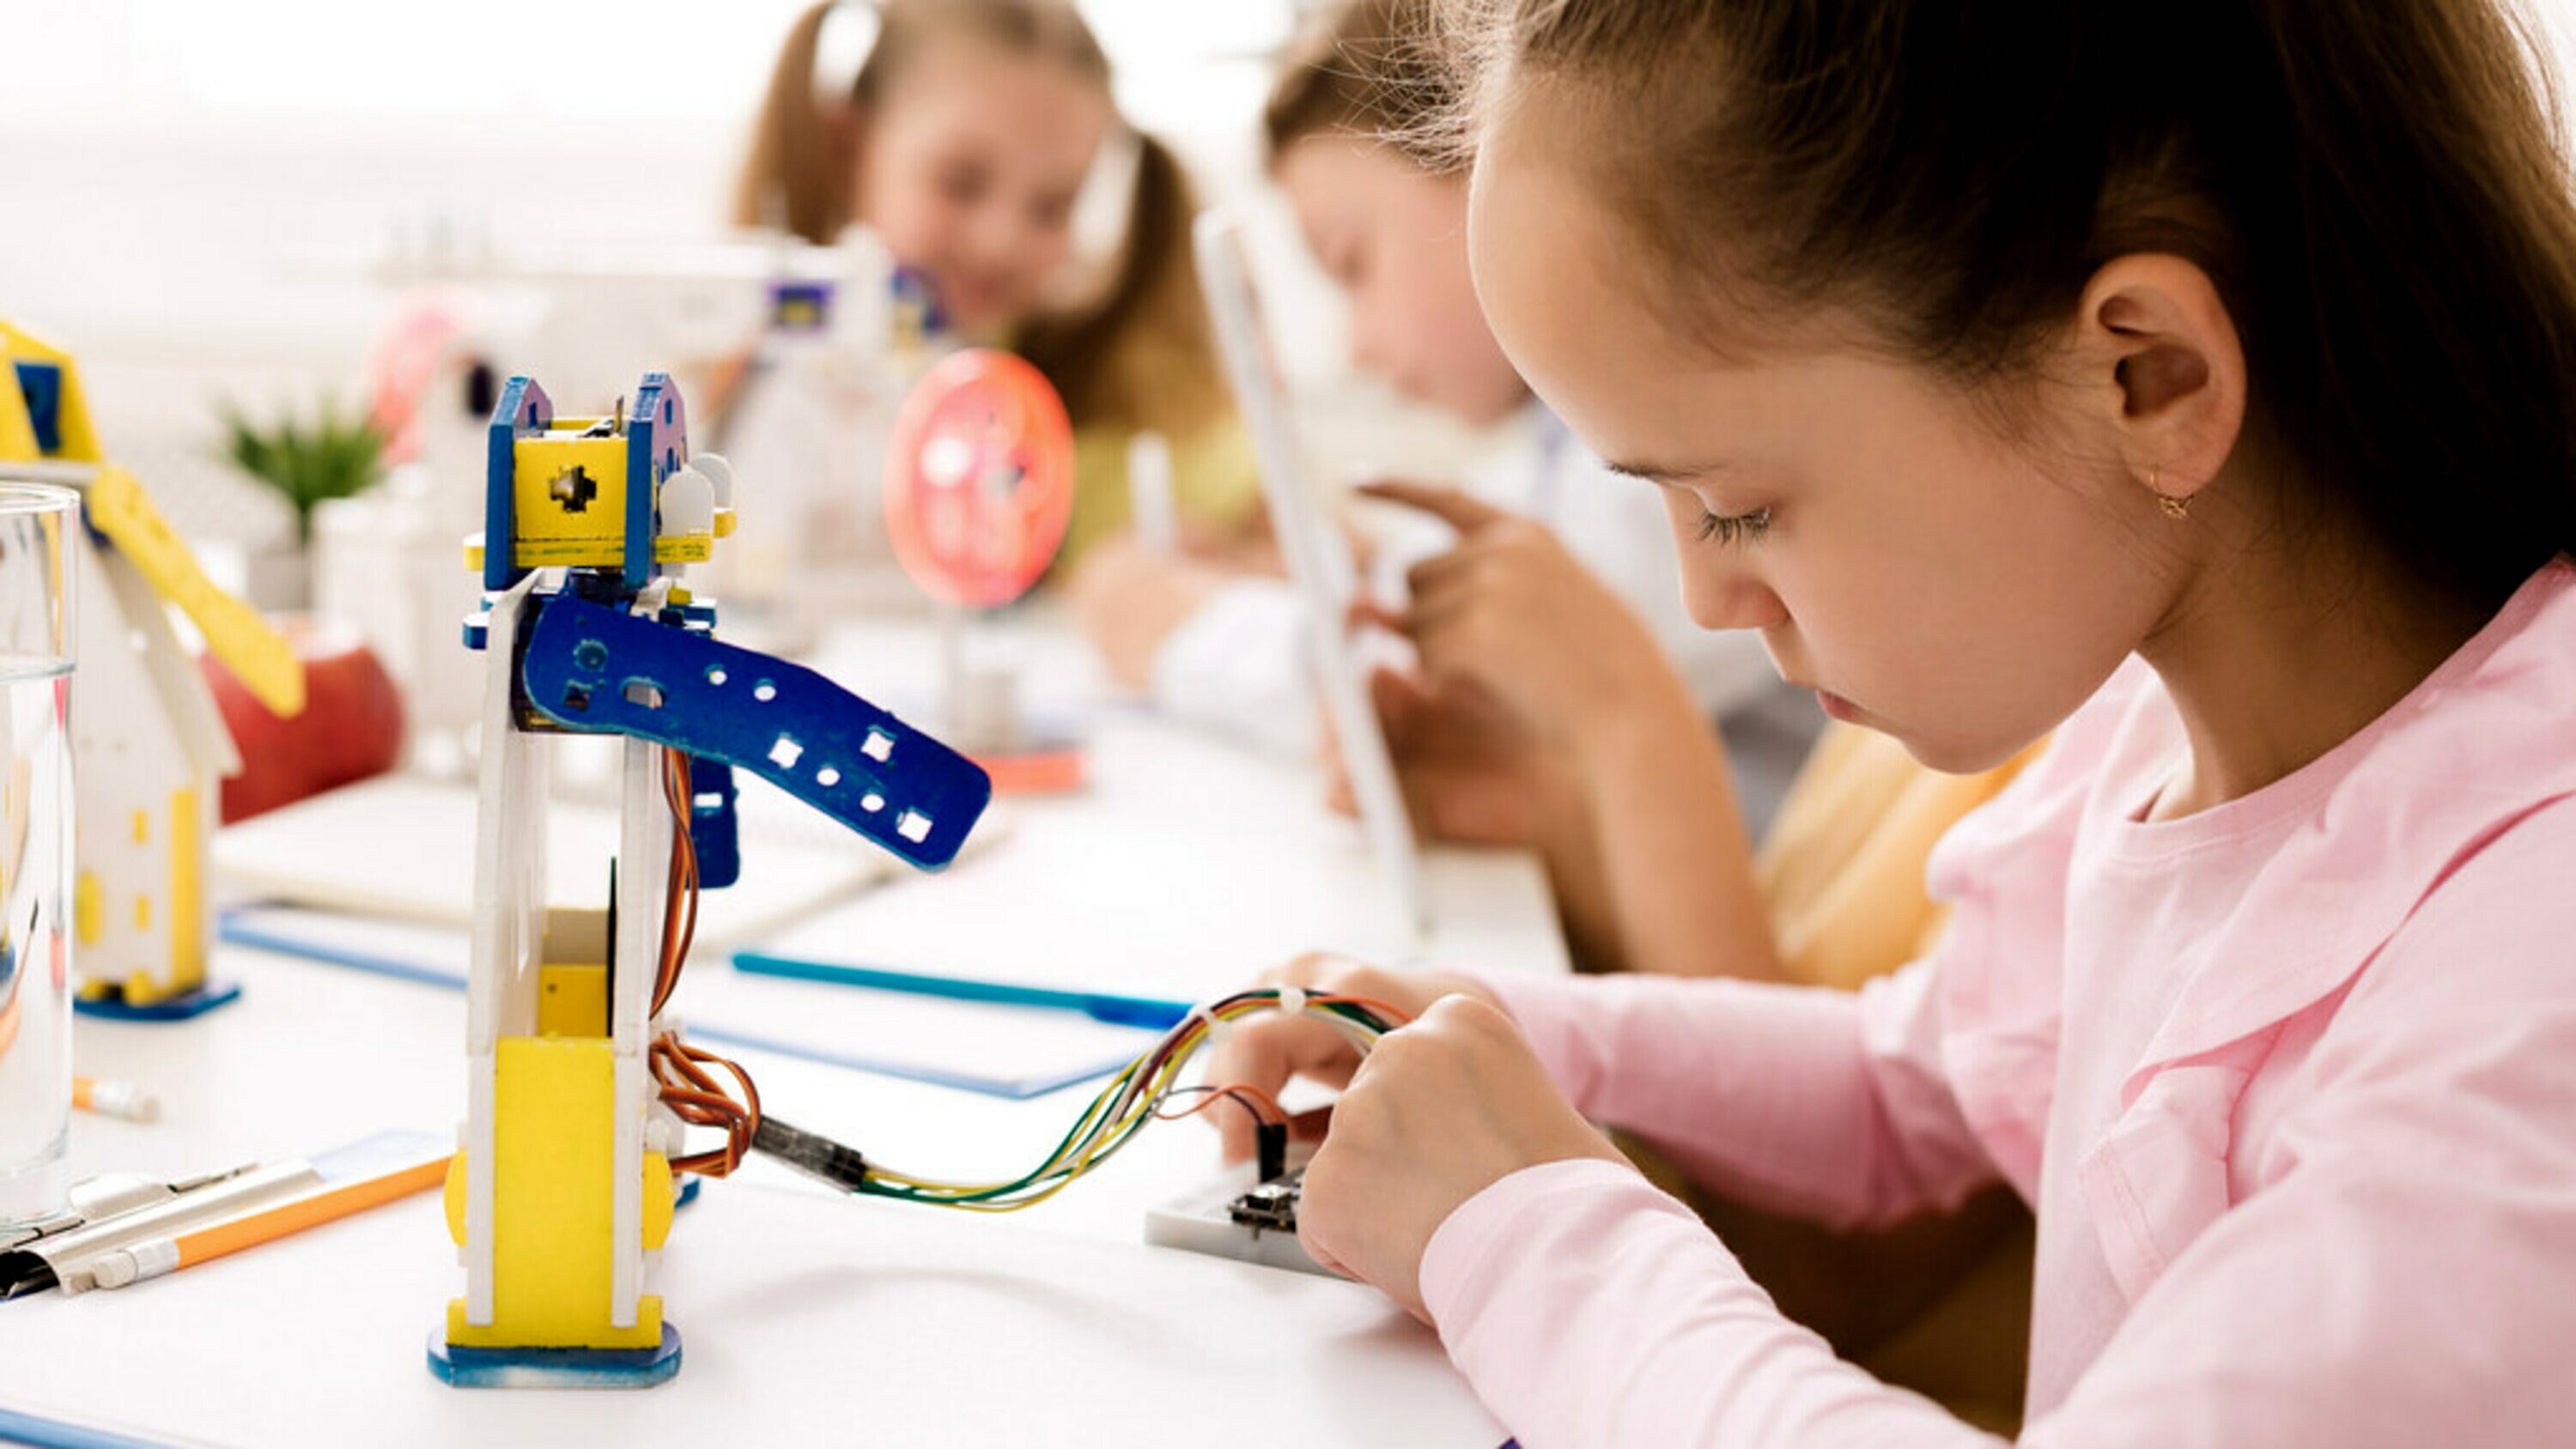 A young girl engaging in STEM learning through robotics.